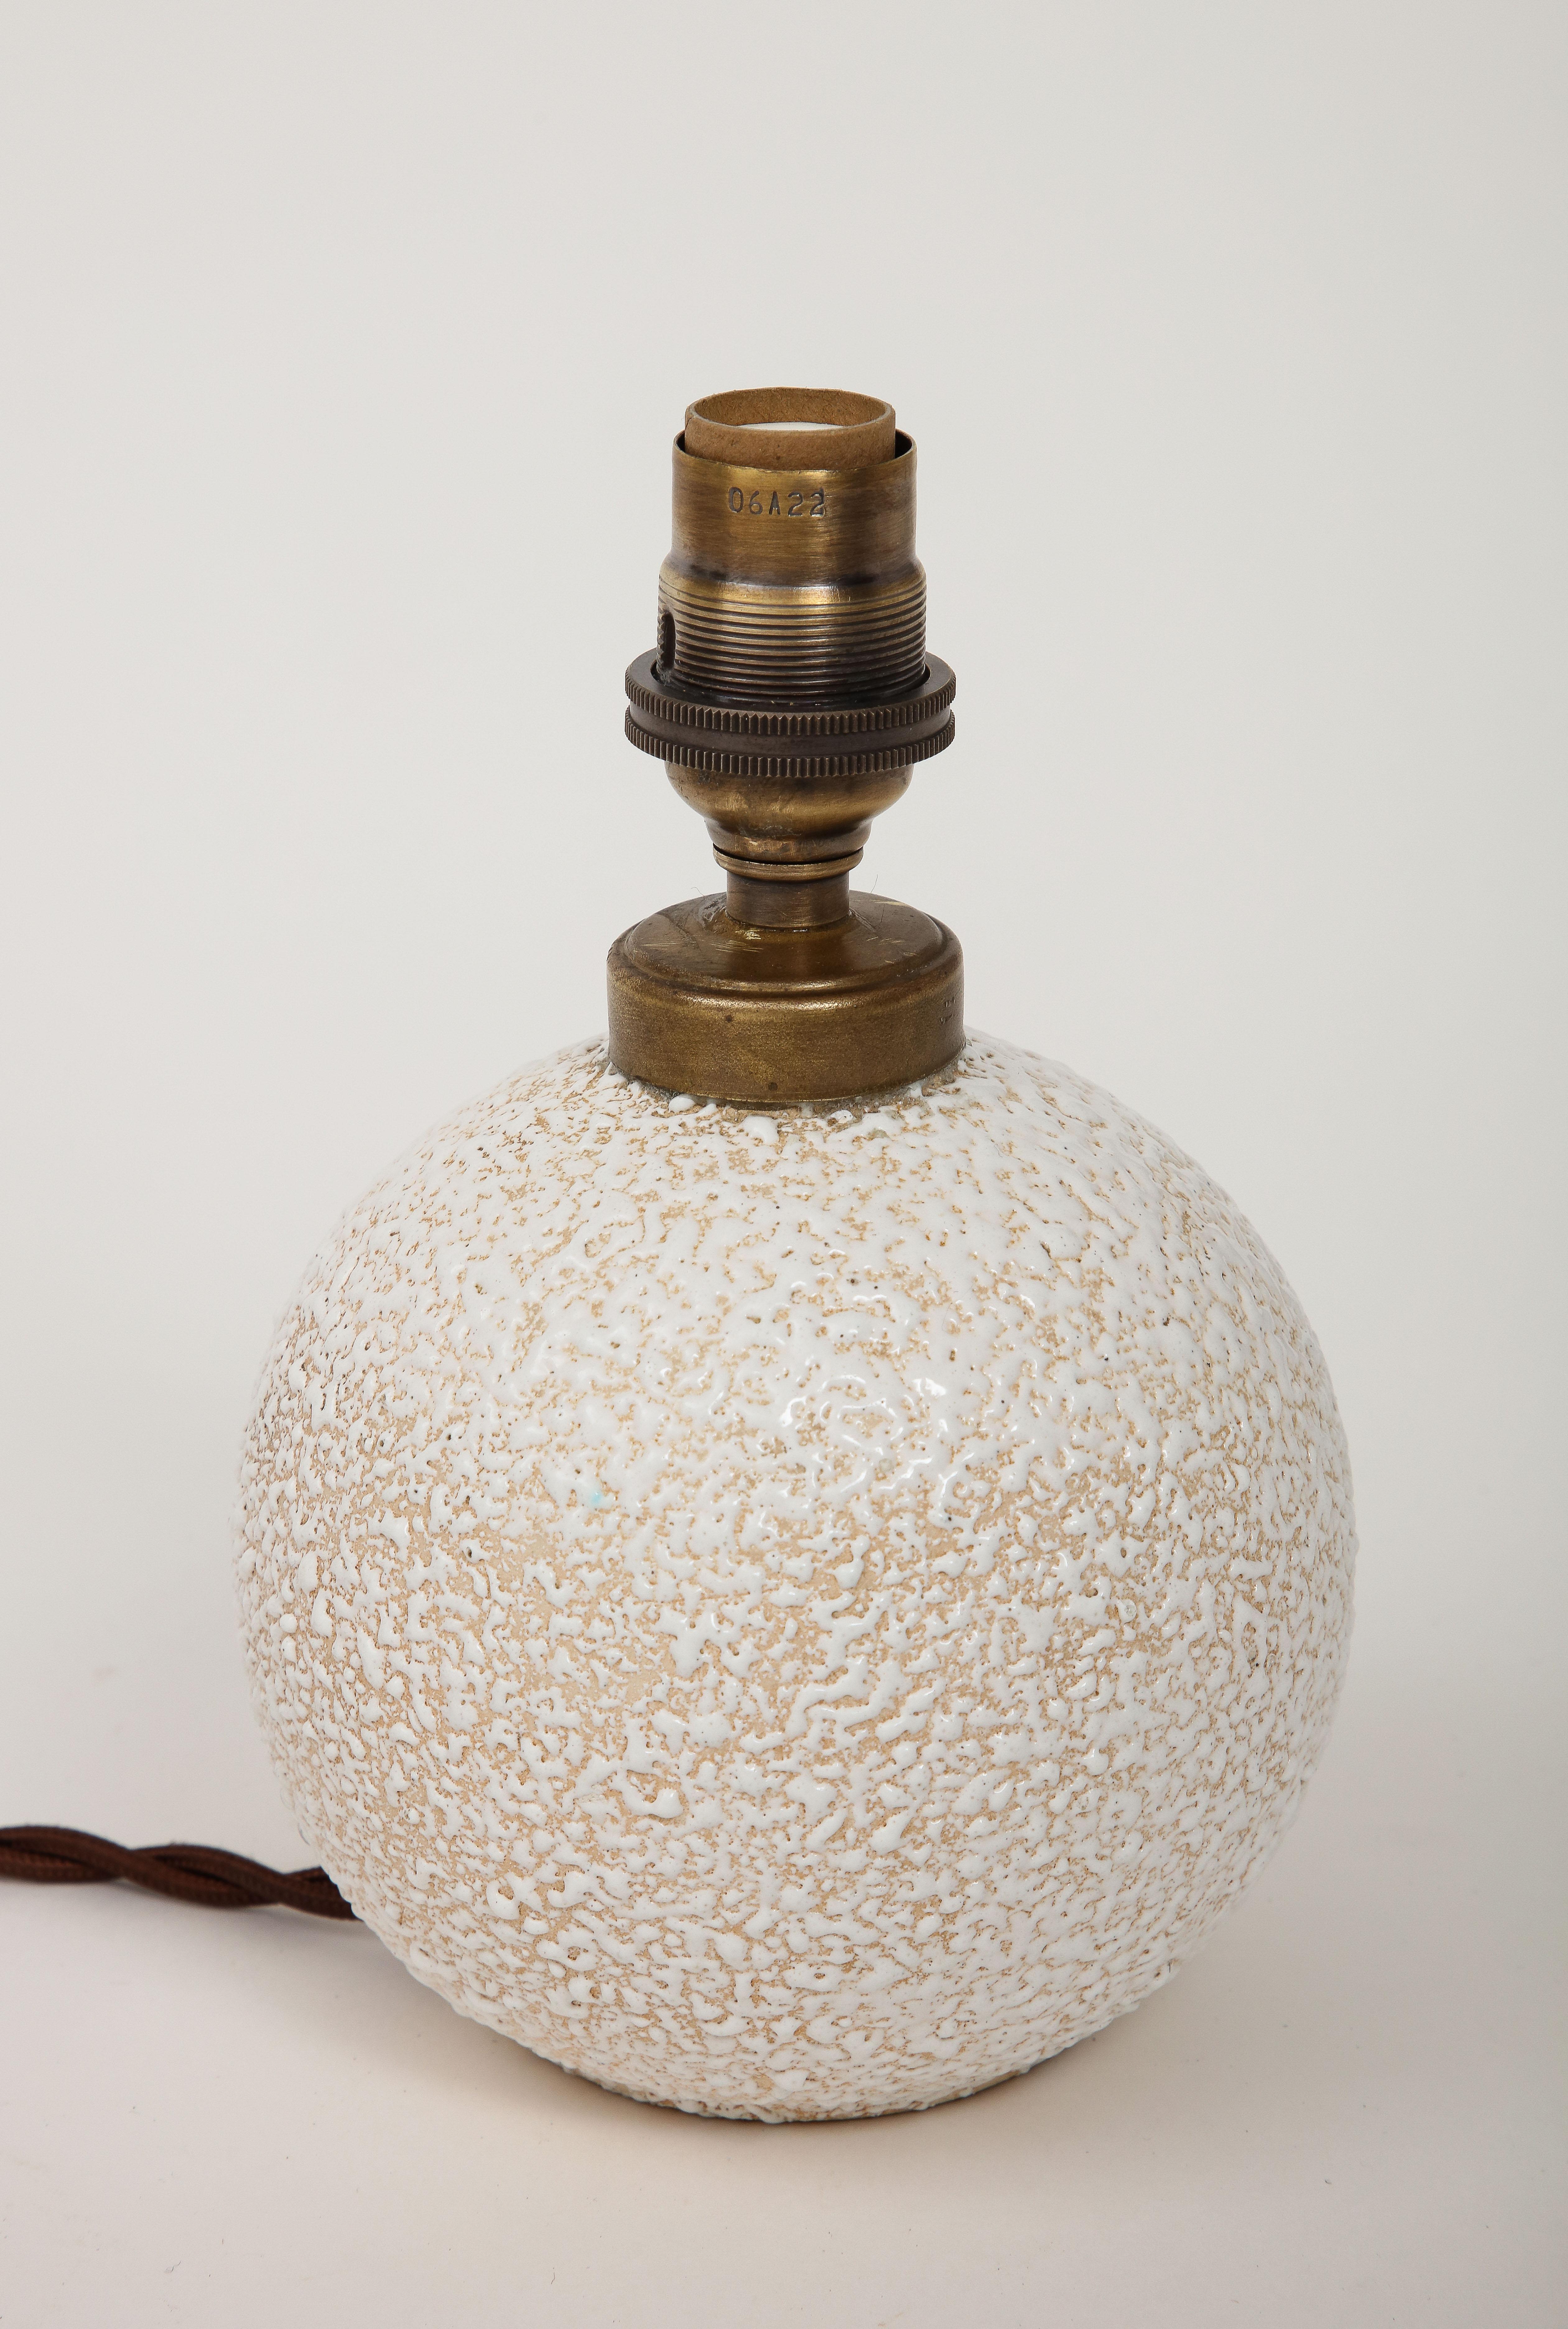 French White on White Ceramic Lamp, 1925, Custom Parchment Shade 4